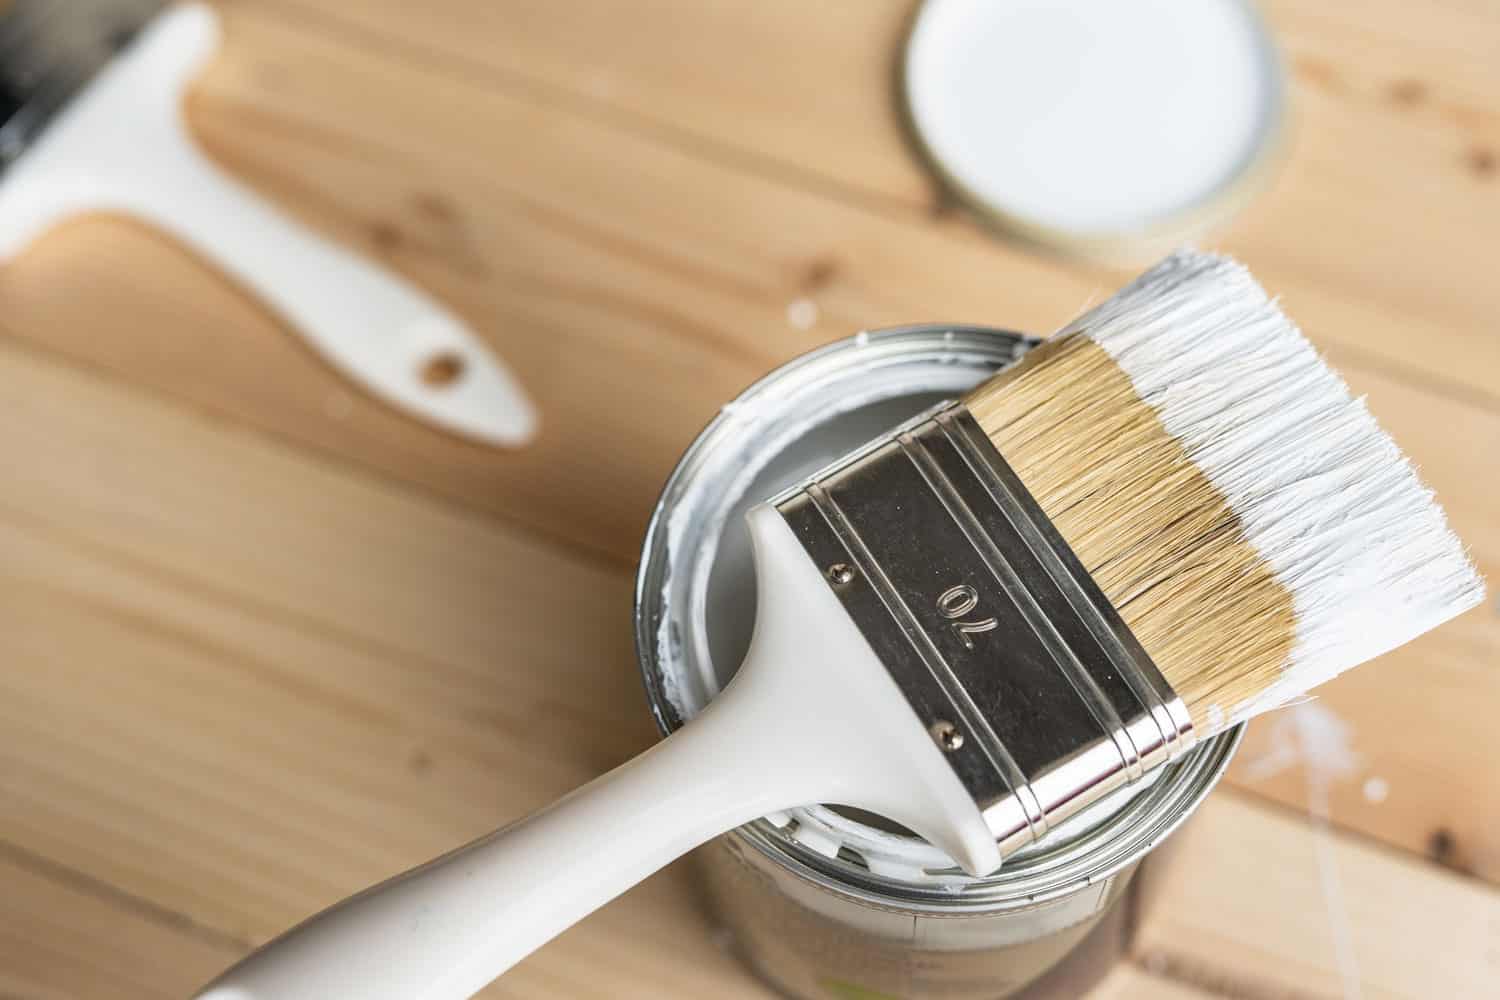 A paint brush dipped in white paint